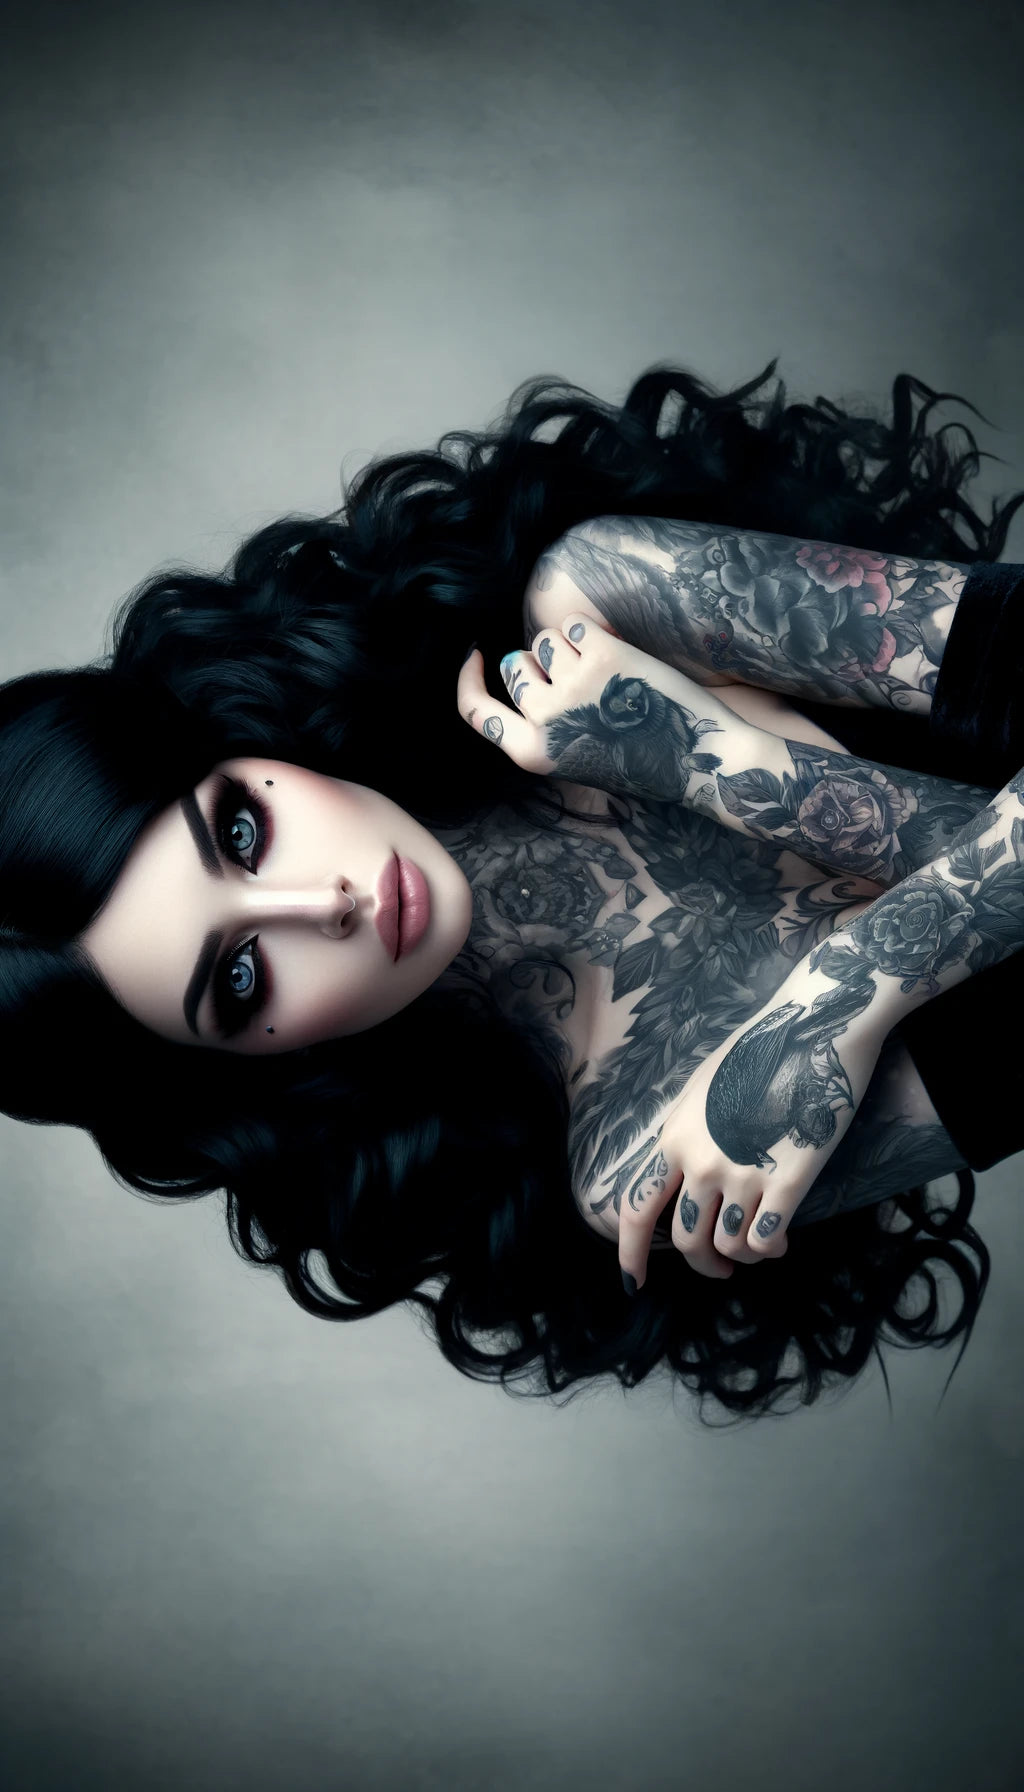 The Inked Shadows: Tattoos in Goth Culture